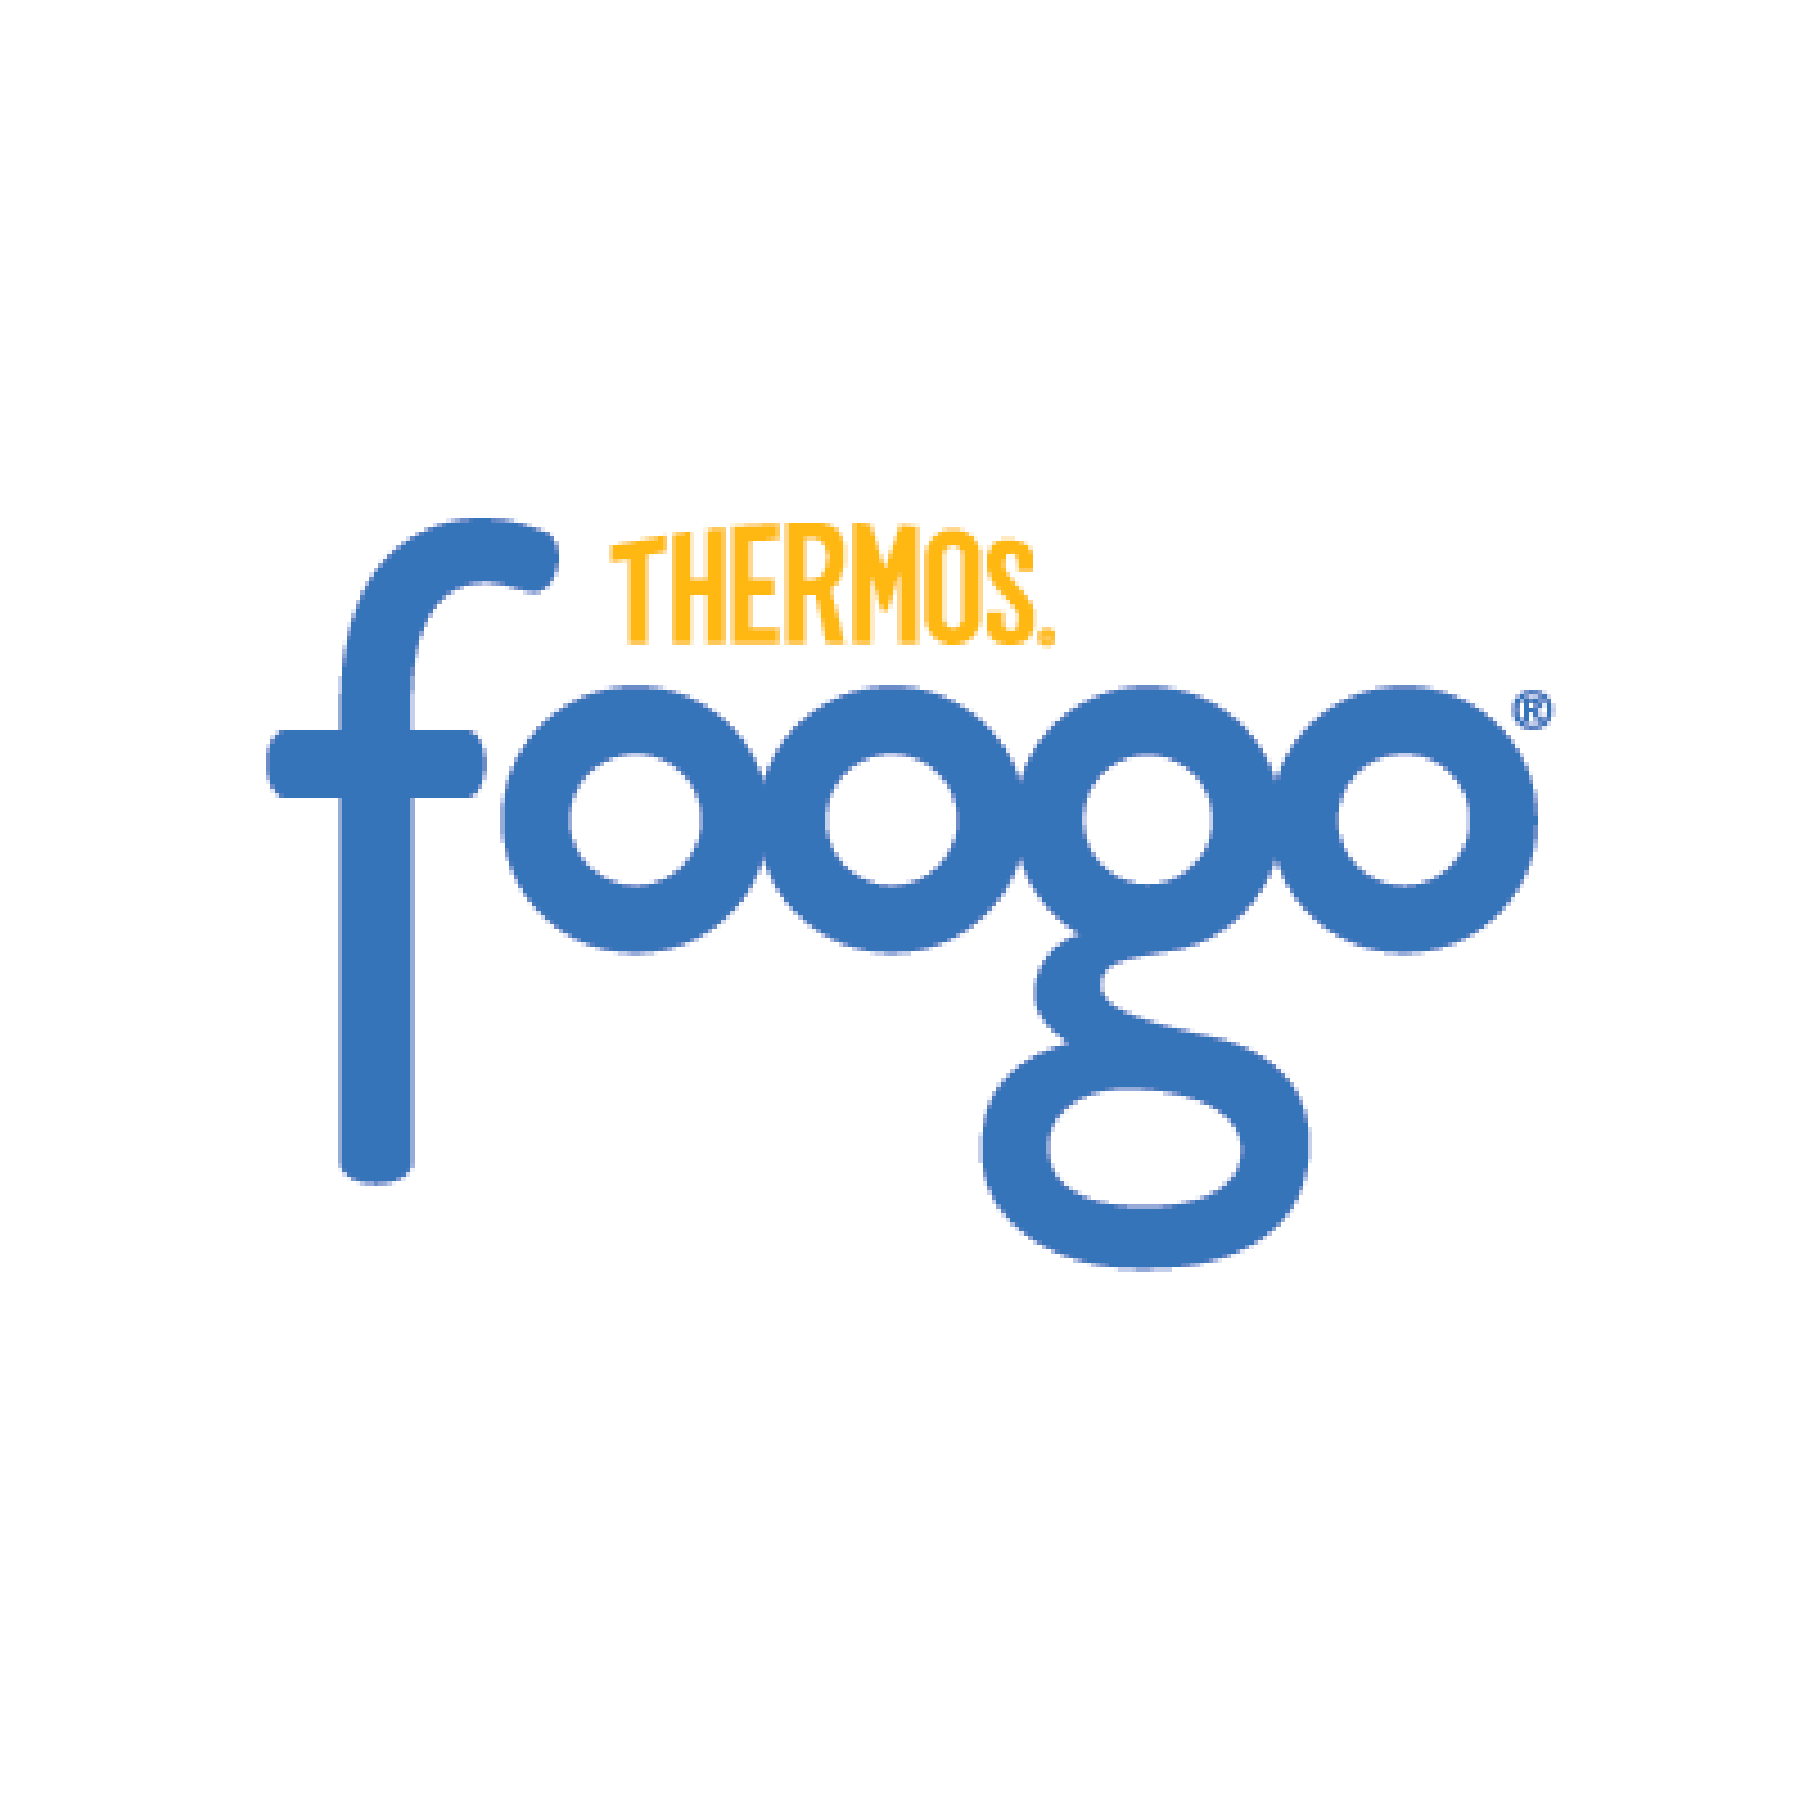 Thermos Logo - Thermos Foogo Juice Cup, 0.29L, Blue & Yellow